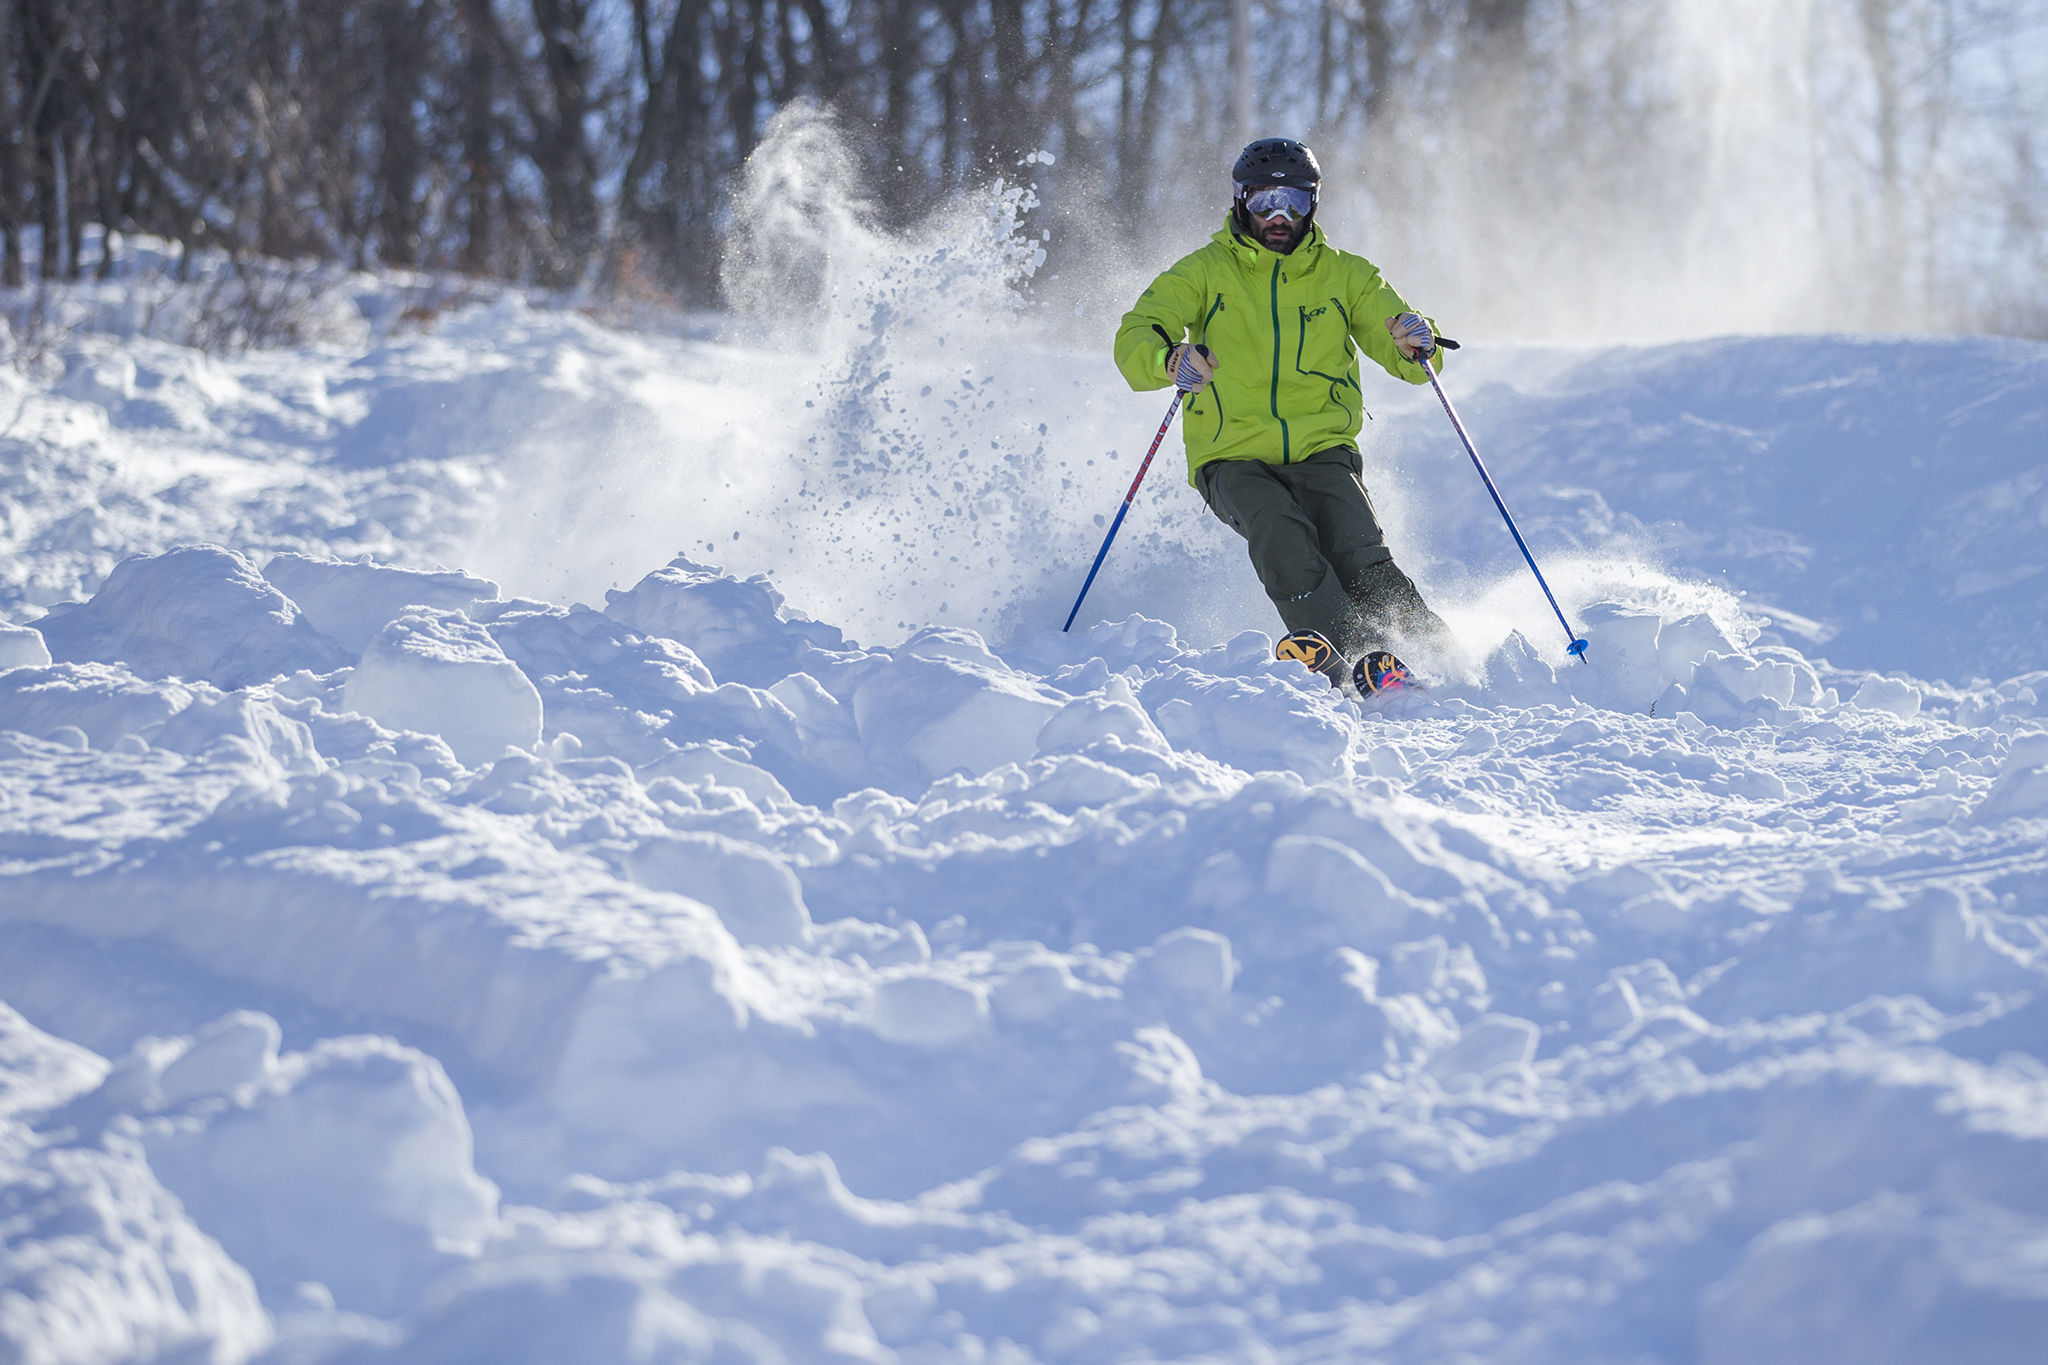 Best Ski Resorts Near Nyc For Winter Getaways In The Snow pertaining to how much to ski at blue hills pertaining to Inspire